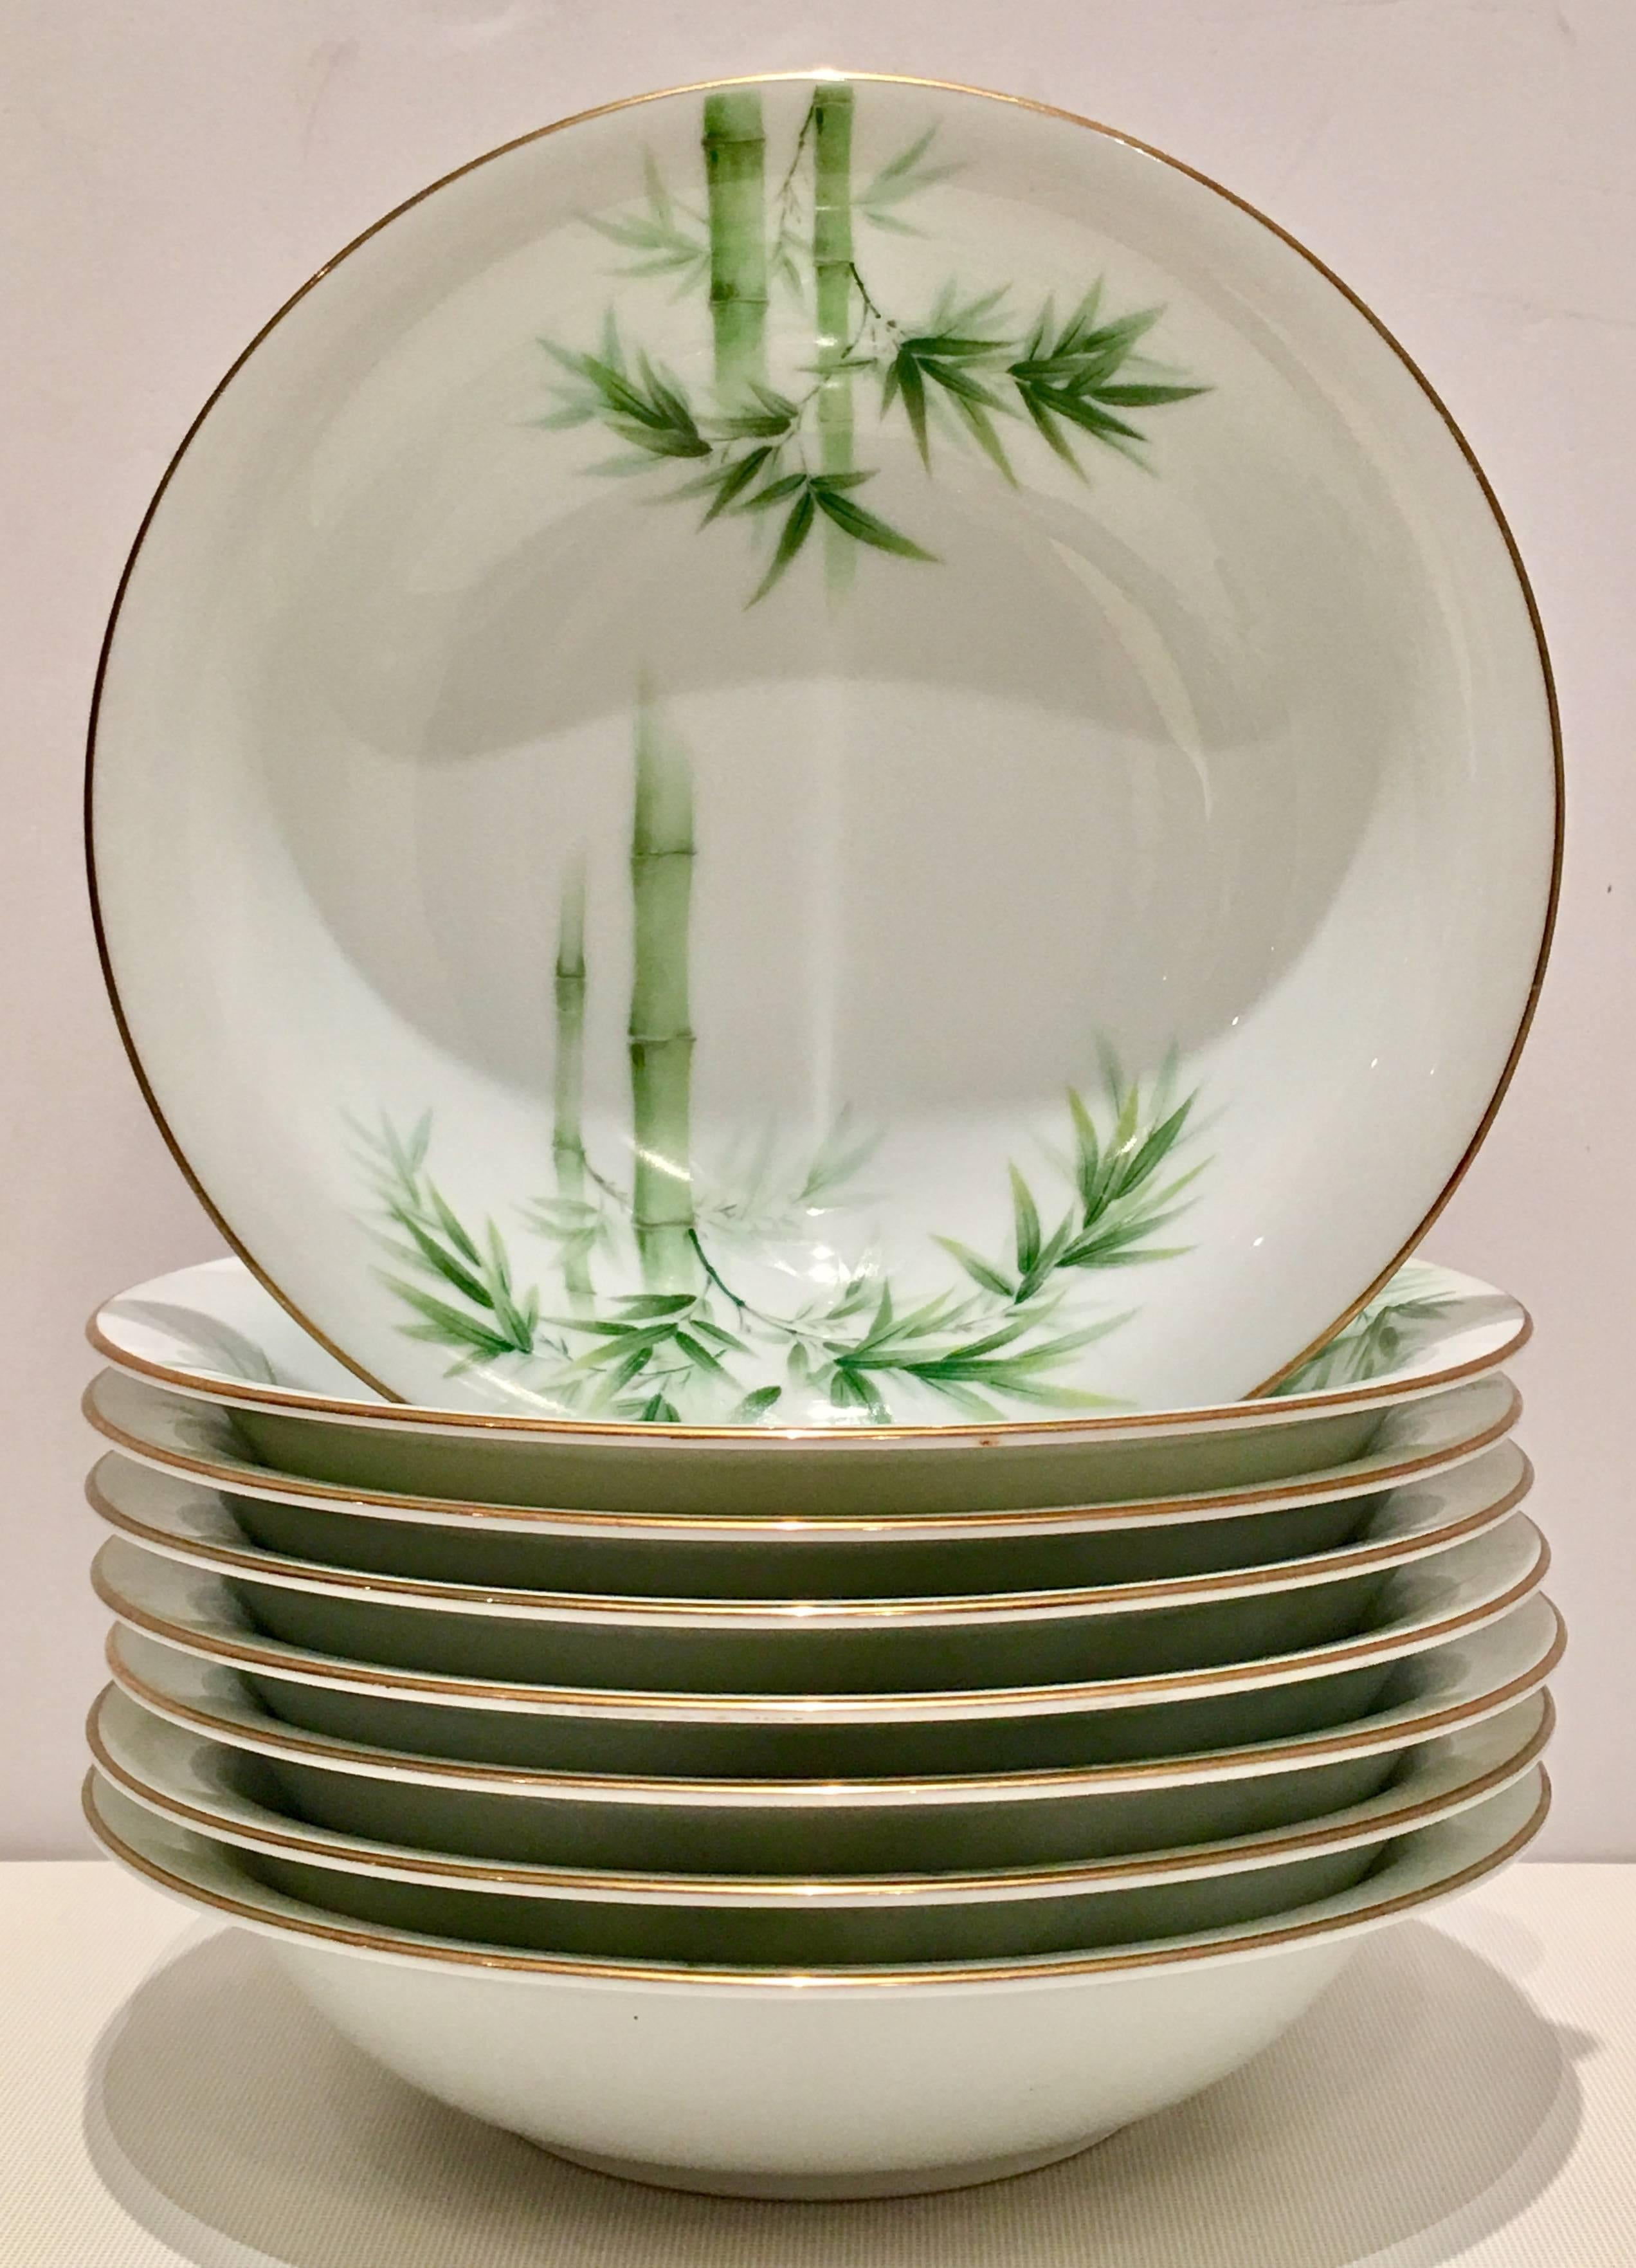 Vintage Japanese porcelain twenty - three-piece china set. This bright white ground pattern features a bright green bamboo pattern with a 22-karat gold rim detail. Set includes, six dinner plates, eight rim soup bowls, eight salad or dessert plates